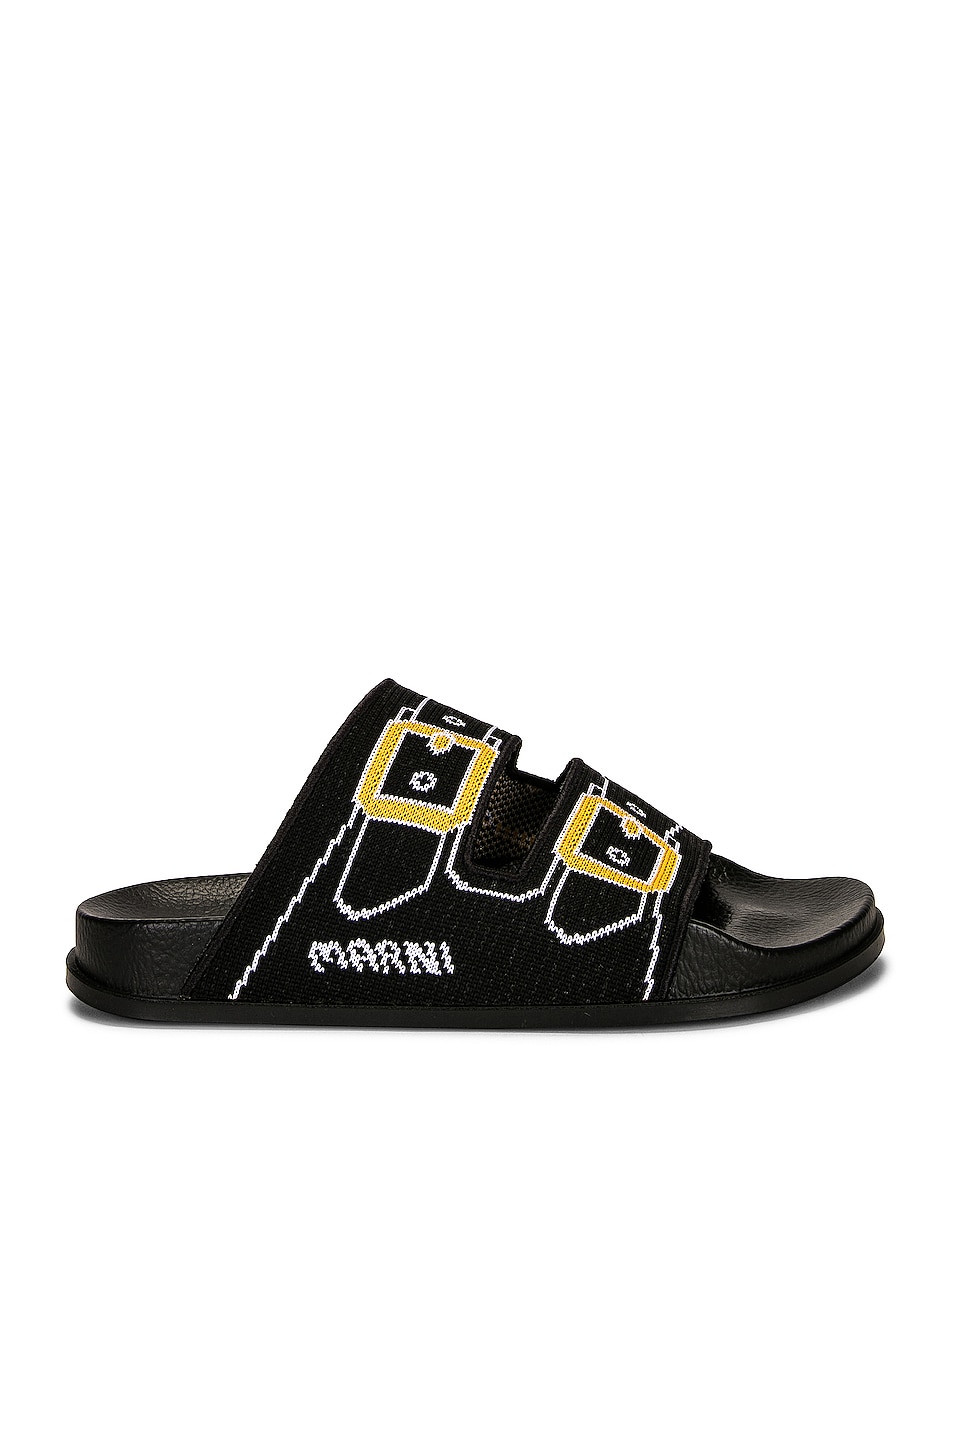 Image 1 of Marni Flat Sandals in Black & Gold